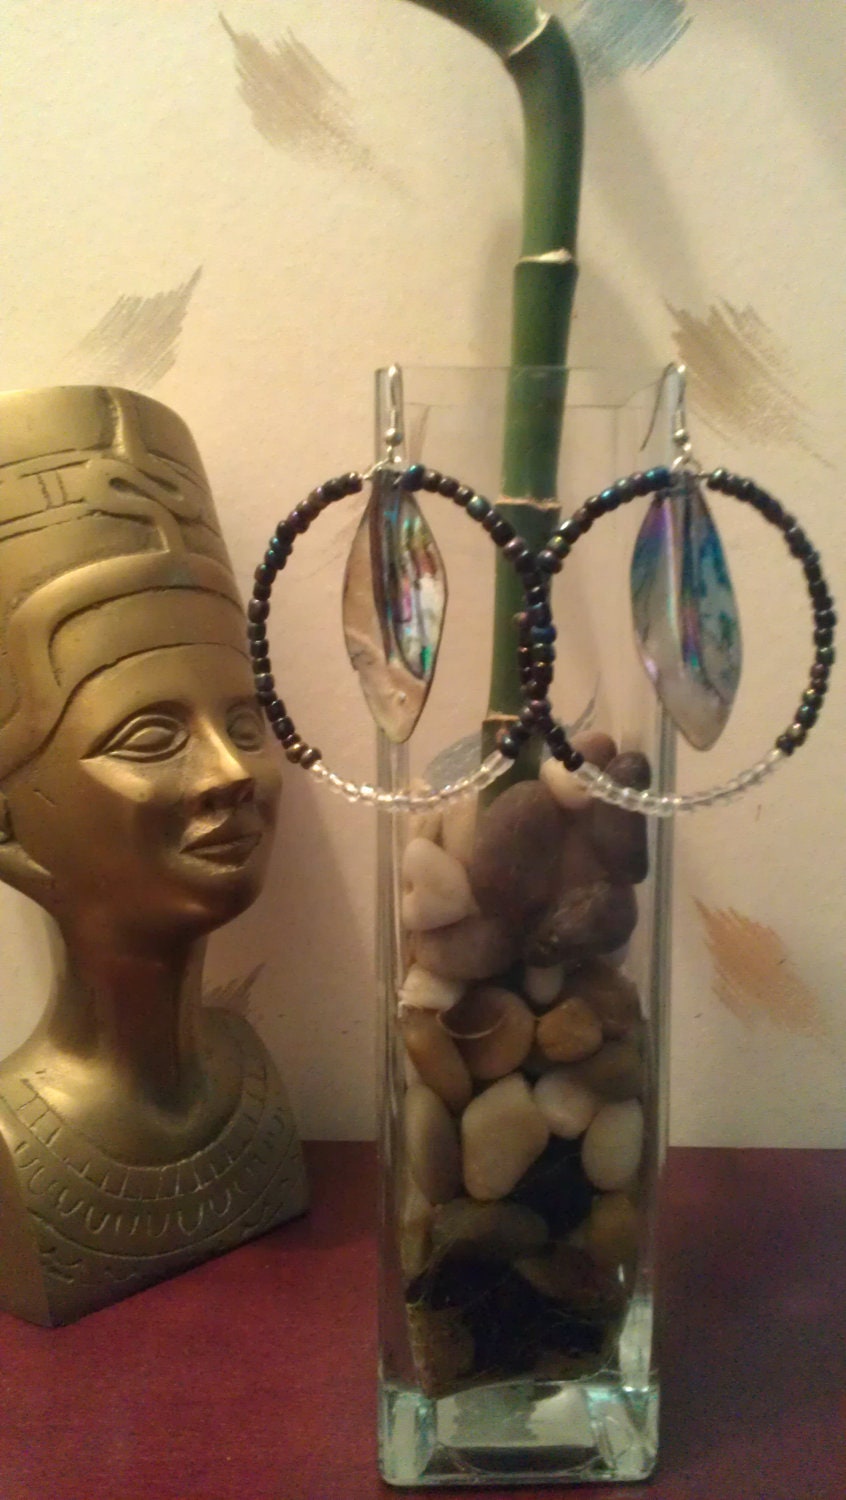 Multicolored Metallic & Translucent Beaded Hoop Earrings with Hanging Iridescent Accents: "SyberRings"